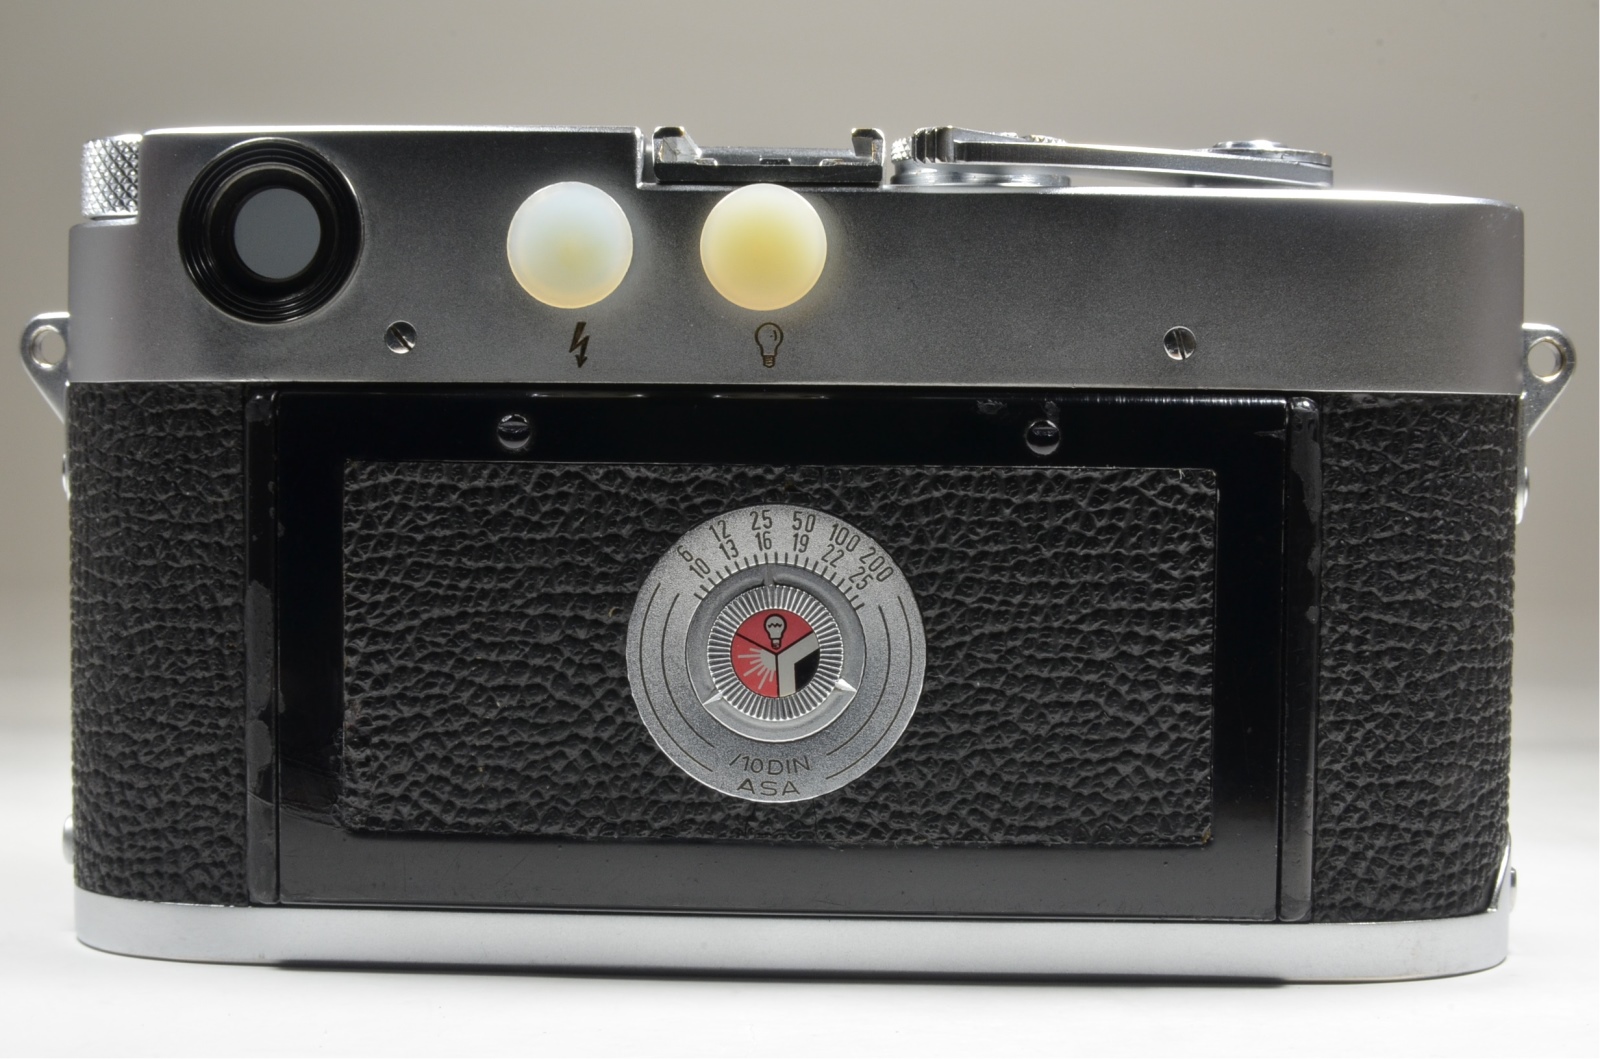 leica m3 double stroke s/n 704138 year 1954 with full leather case